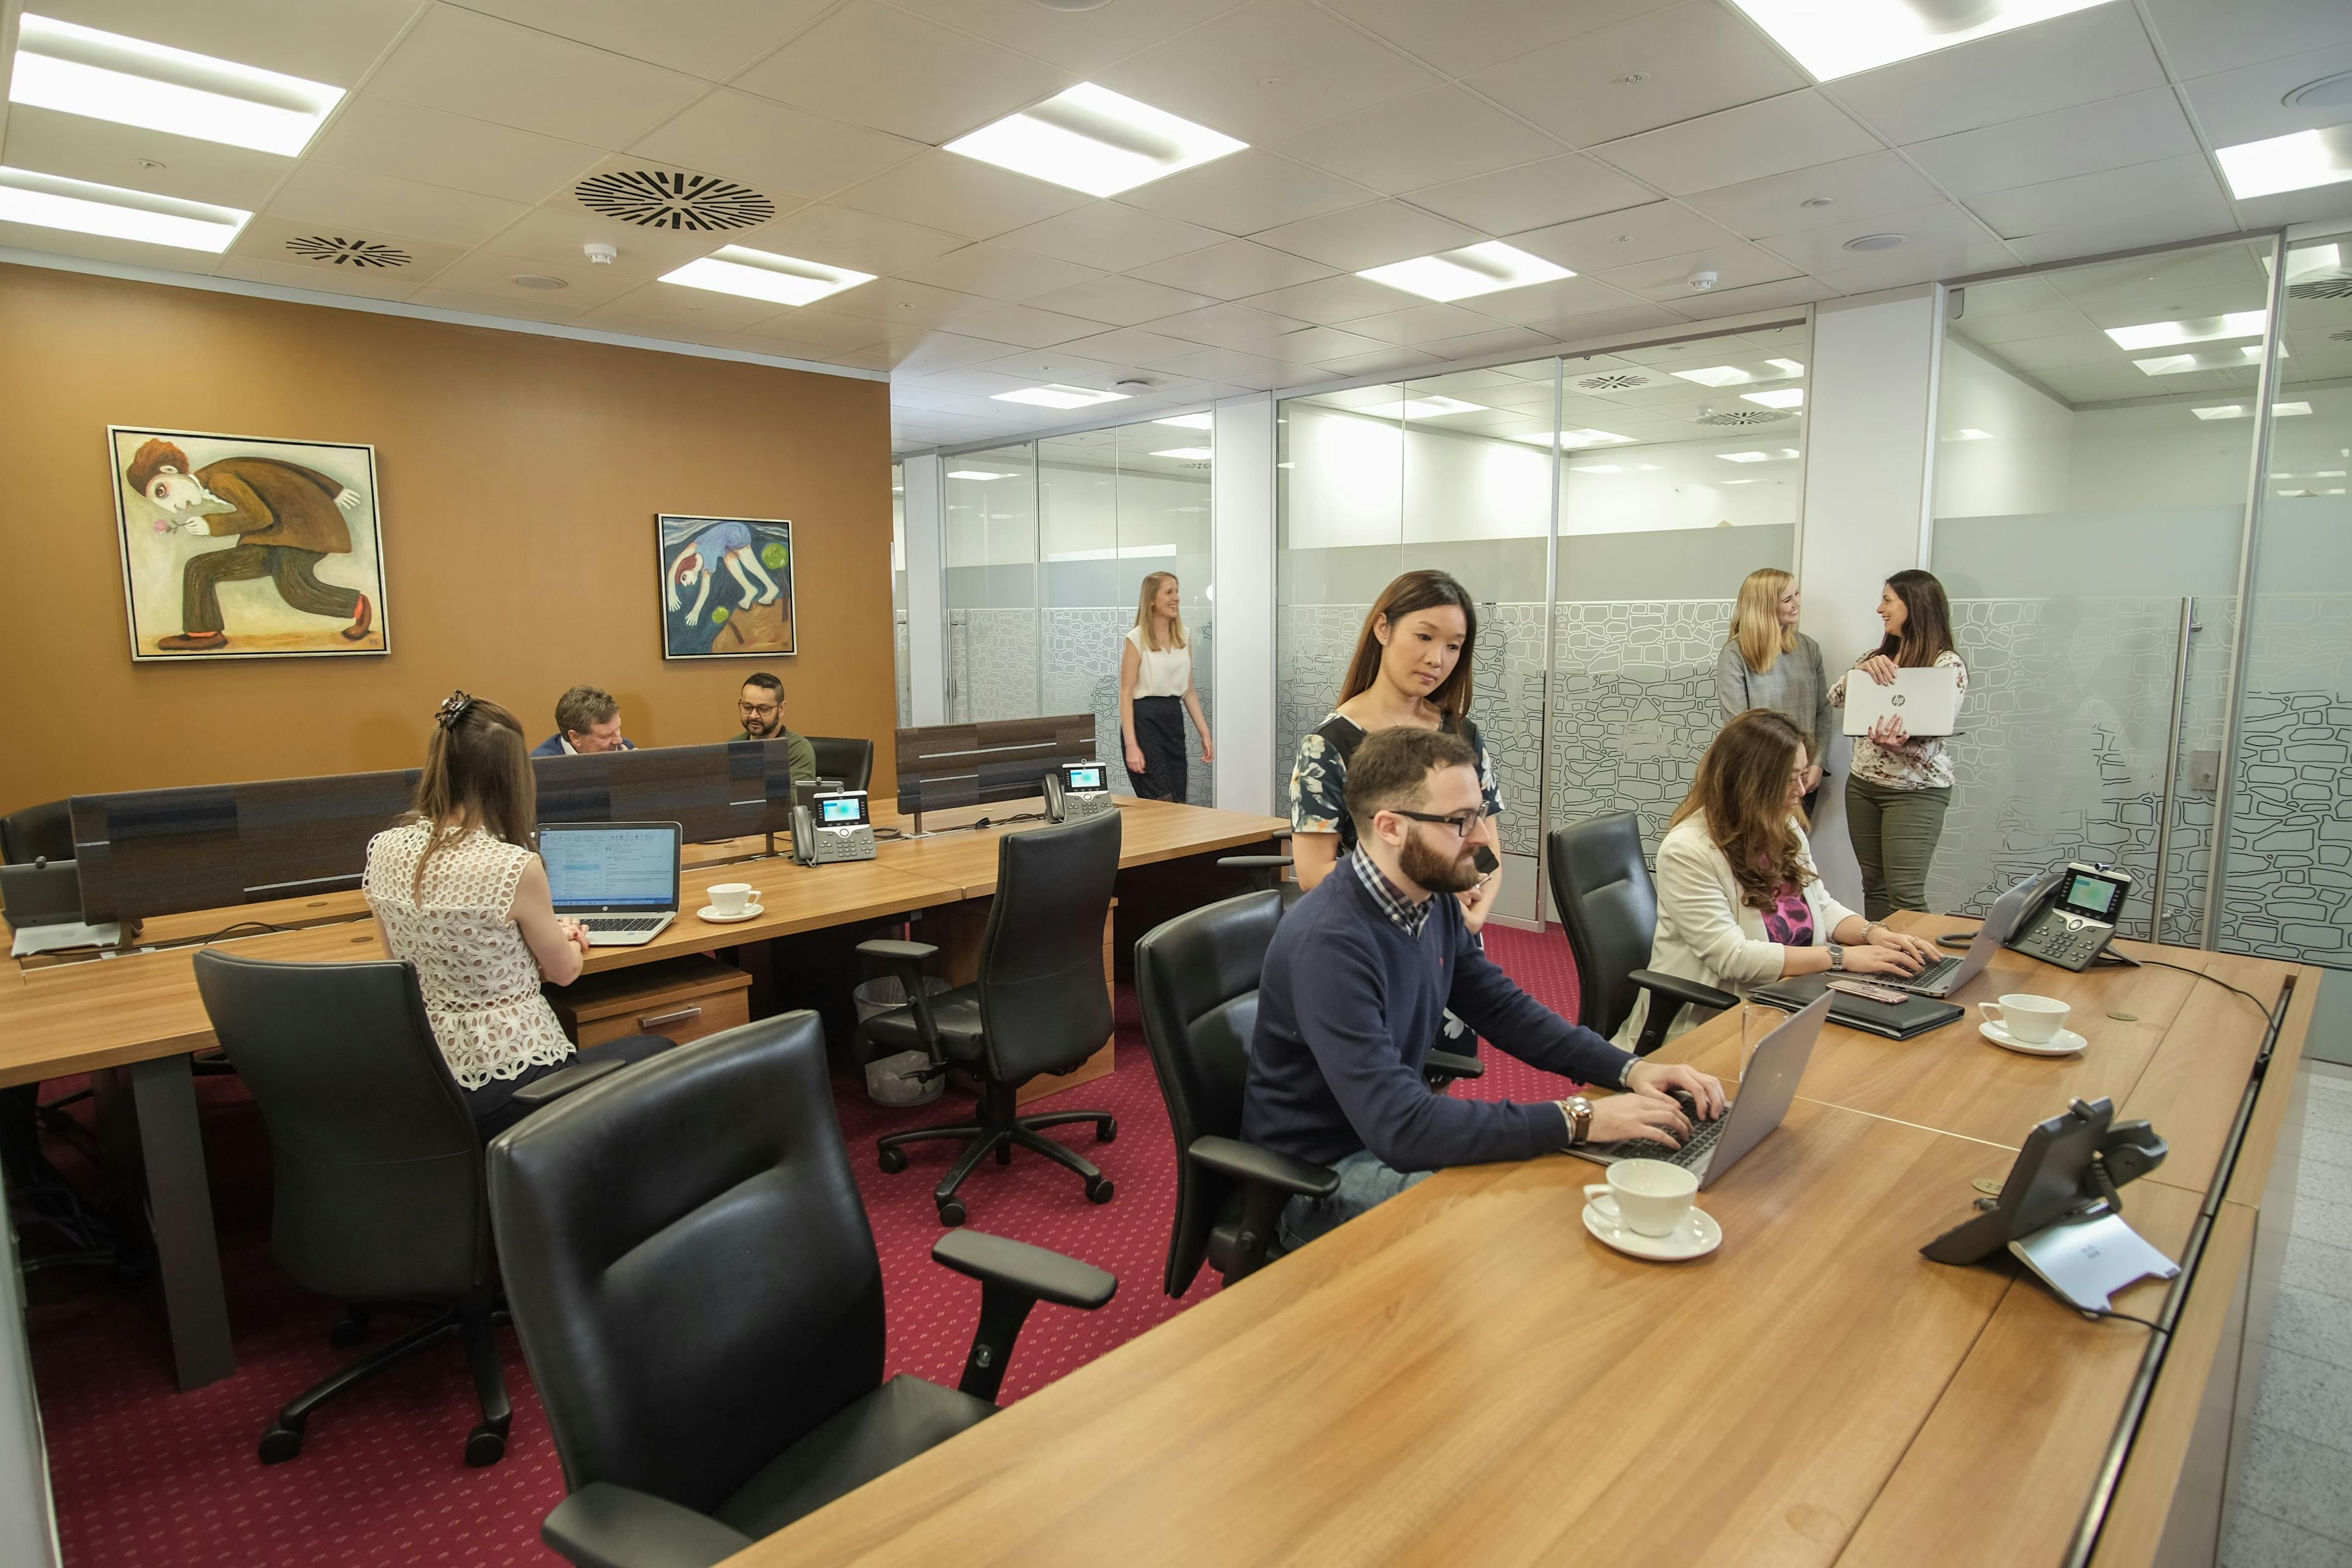  City of London – 4 Person Office – The Leadenhall Building 